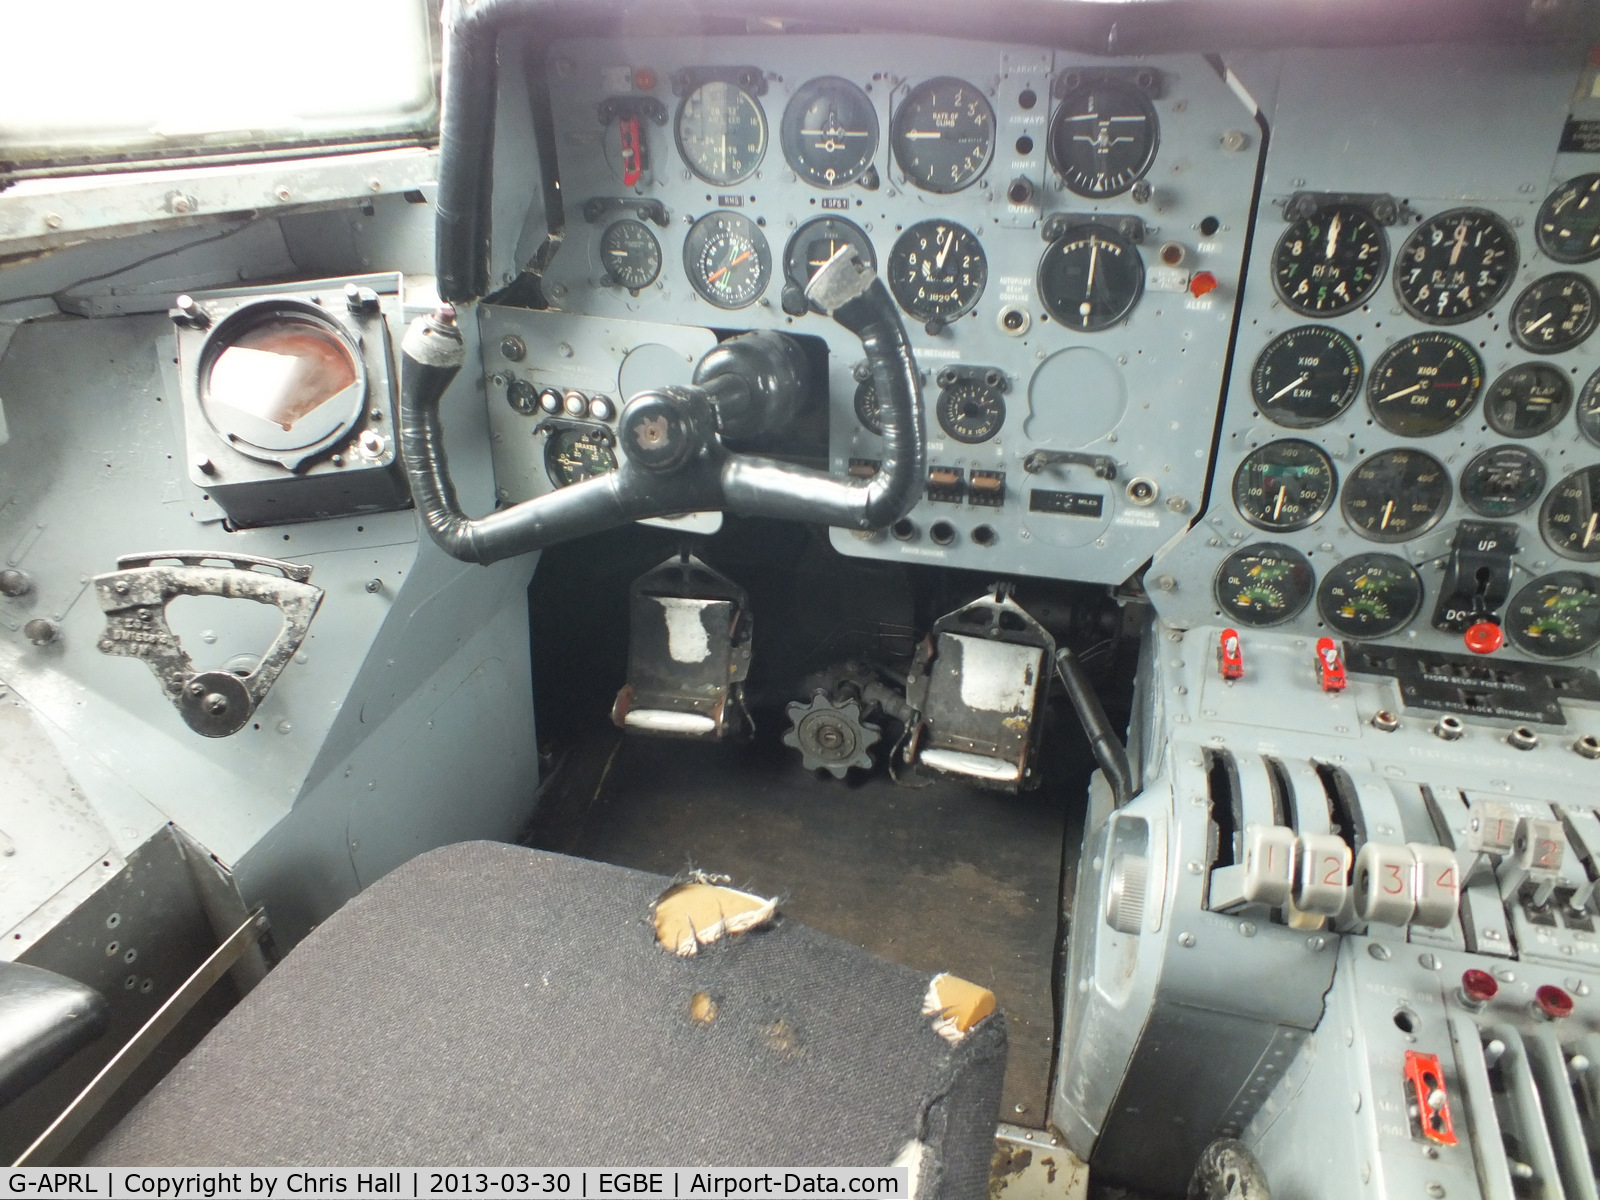 G-APRL, 1959 Armstrong Whitworth AW650 Argosy 101 C/N 6652, cockpit of Argosy G-APRL preserved at the Midland Air Museum